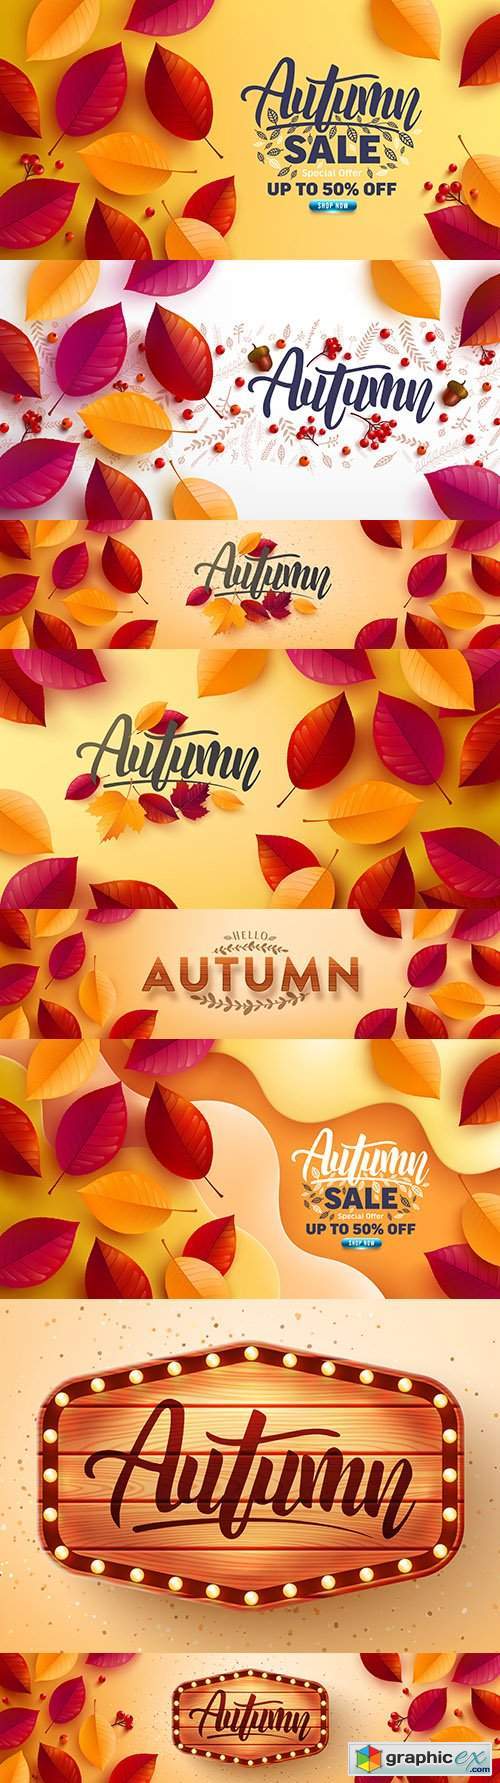 Autumn poster and banner with autumn multi-colored leaves